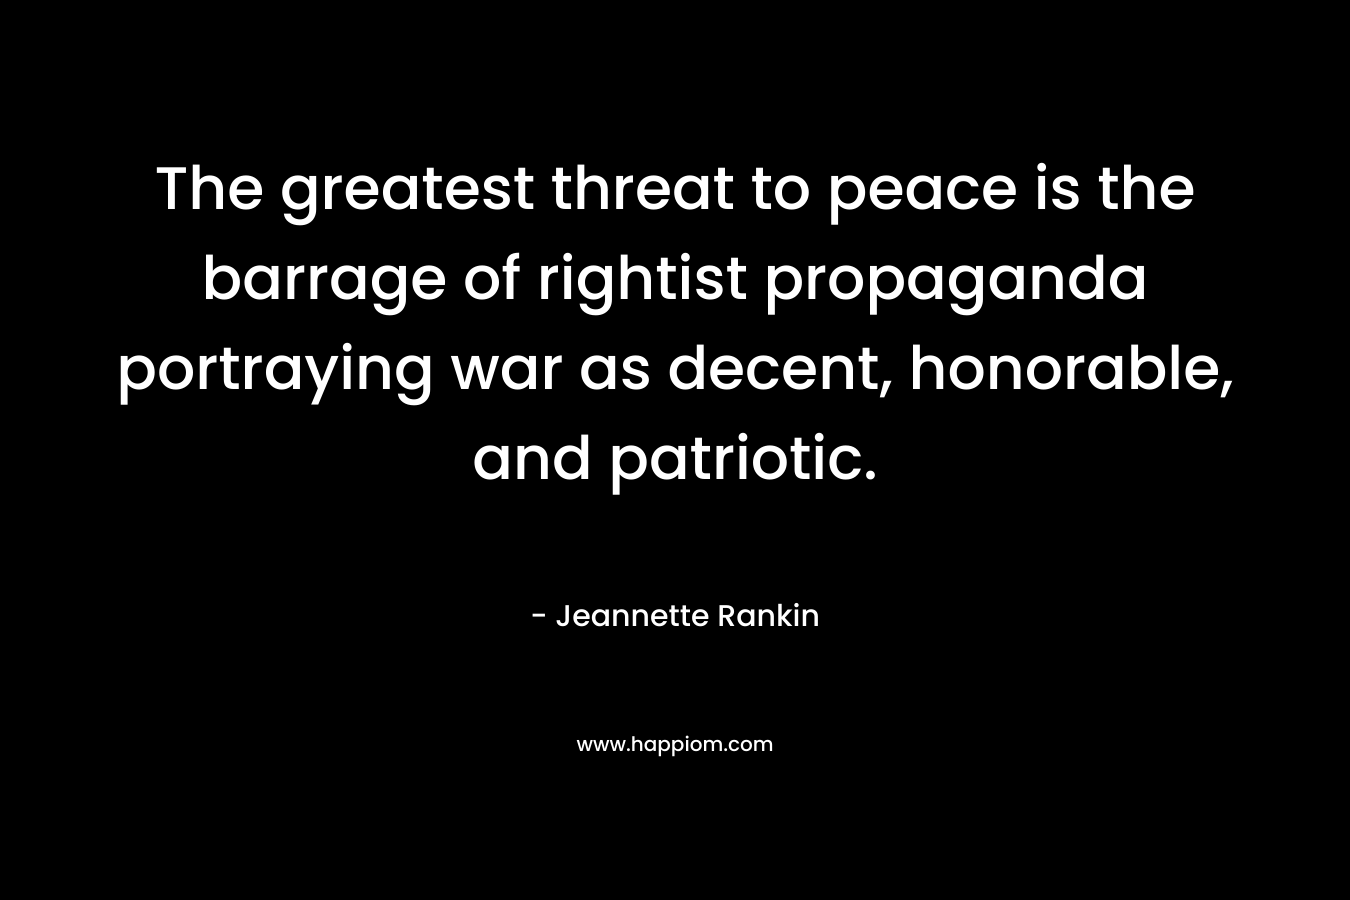 The greatest threat to peace is the barrage of rightist propaganda portraying war as decent, honorable, and patriotic.